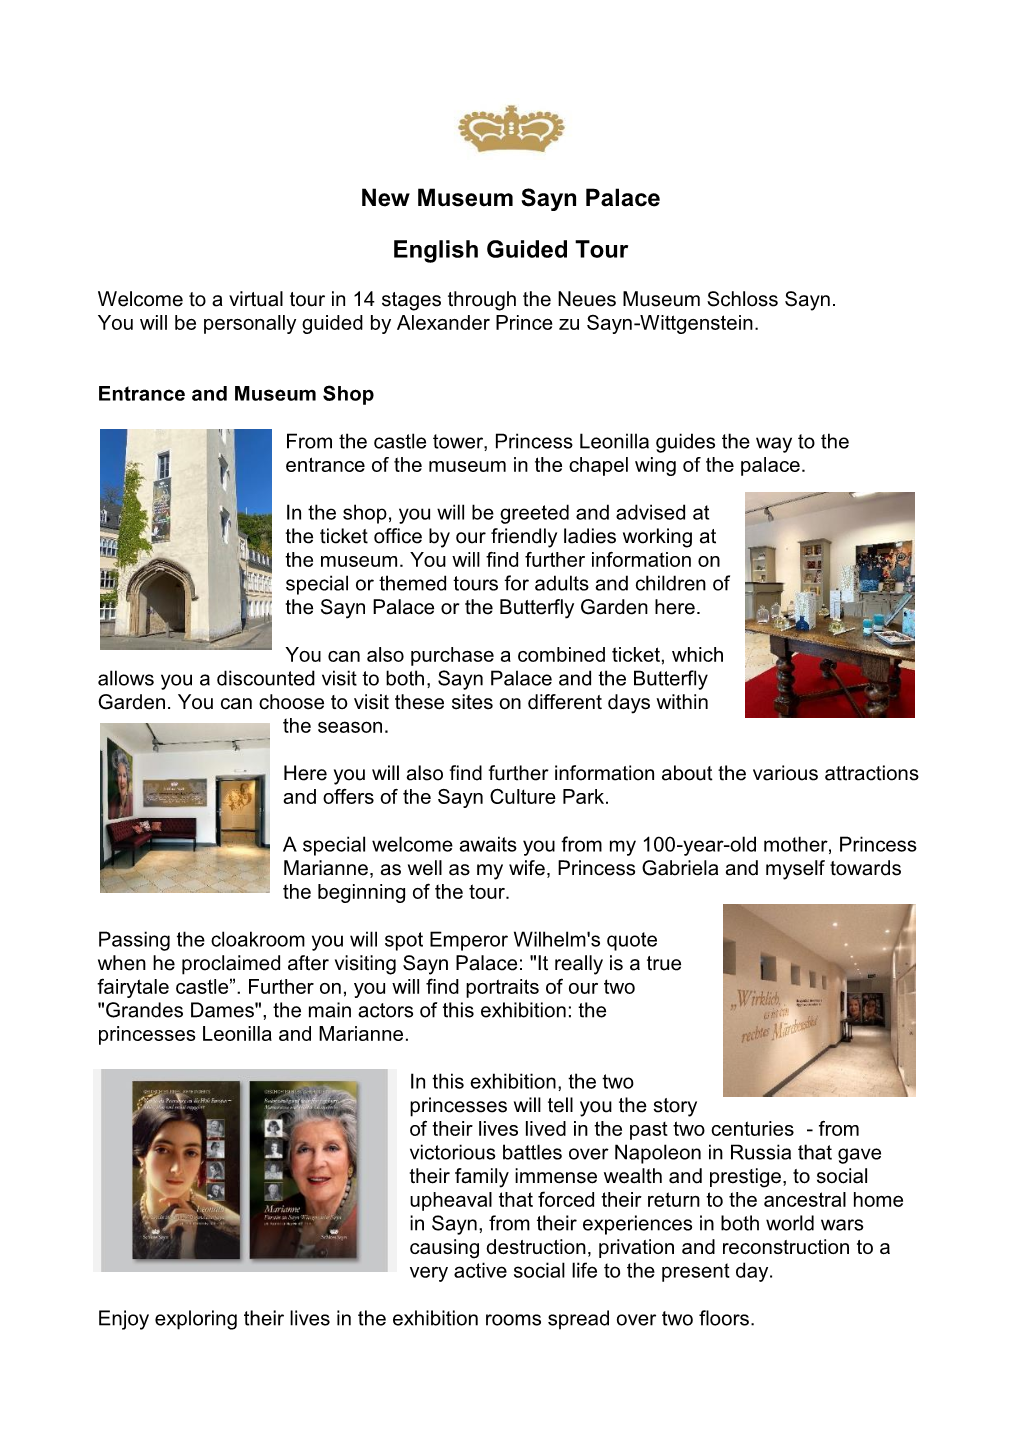 New Museum Sayn Palace English Guided Tour